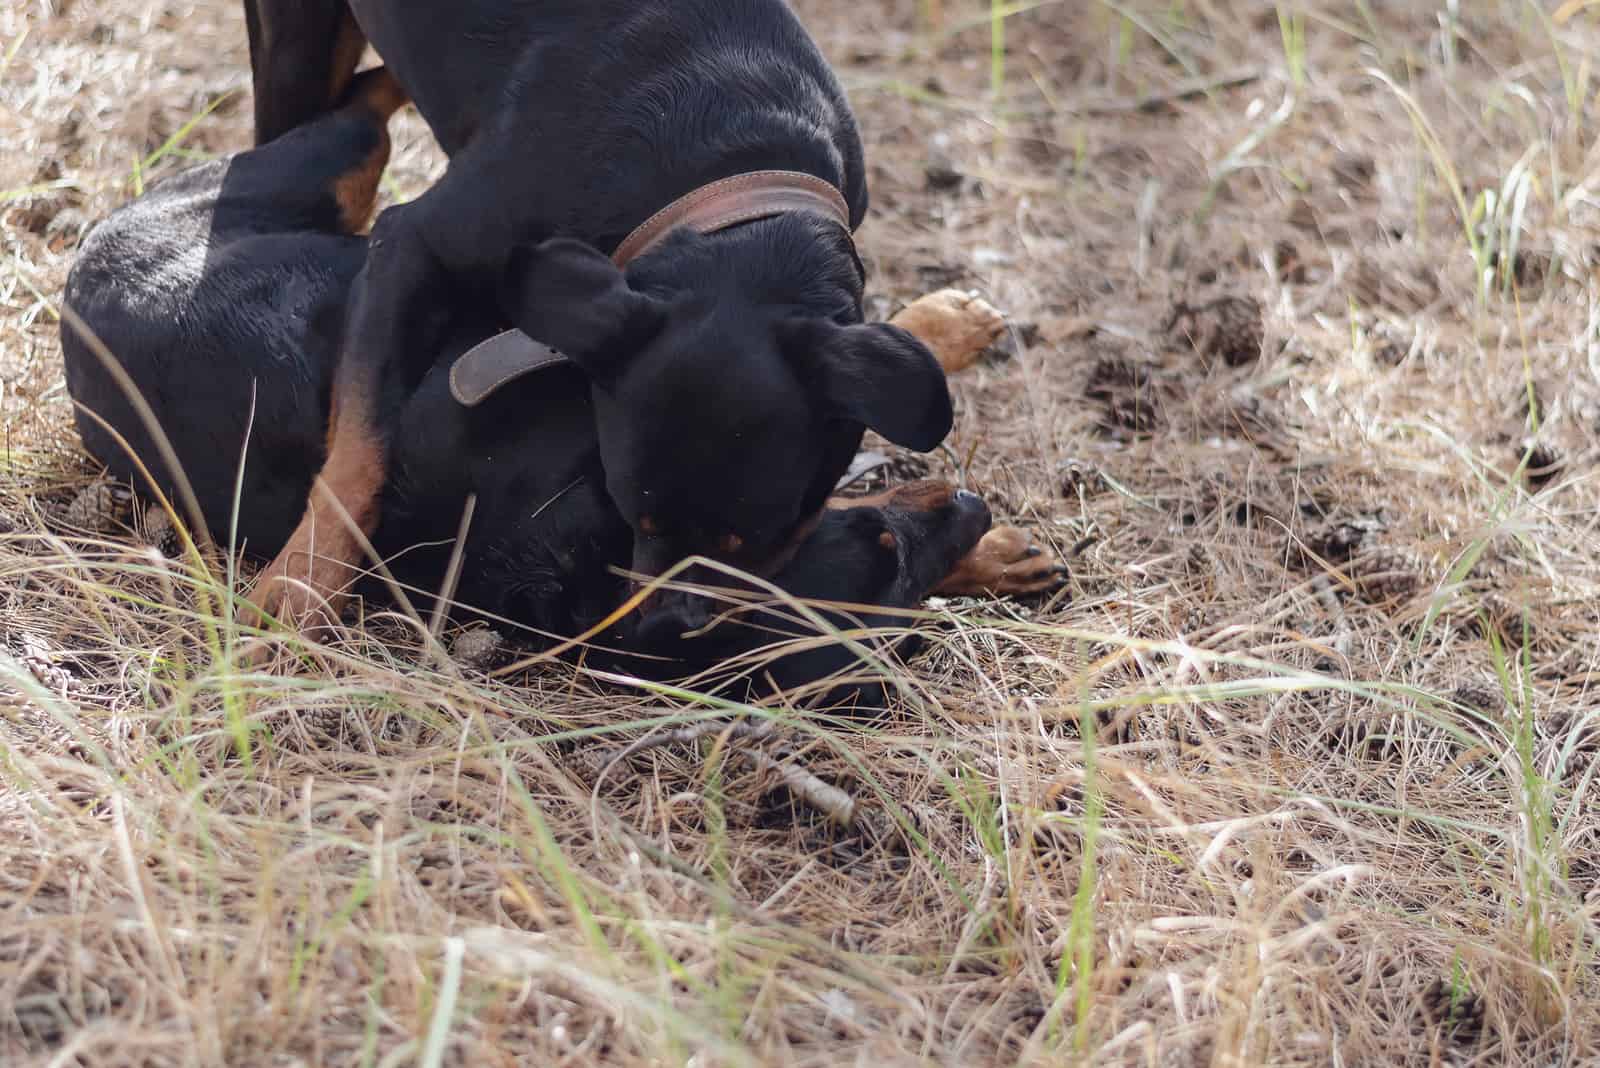 The male Rottweiler wrestles the female and holds her by the neck